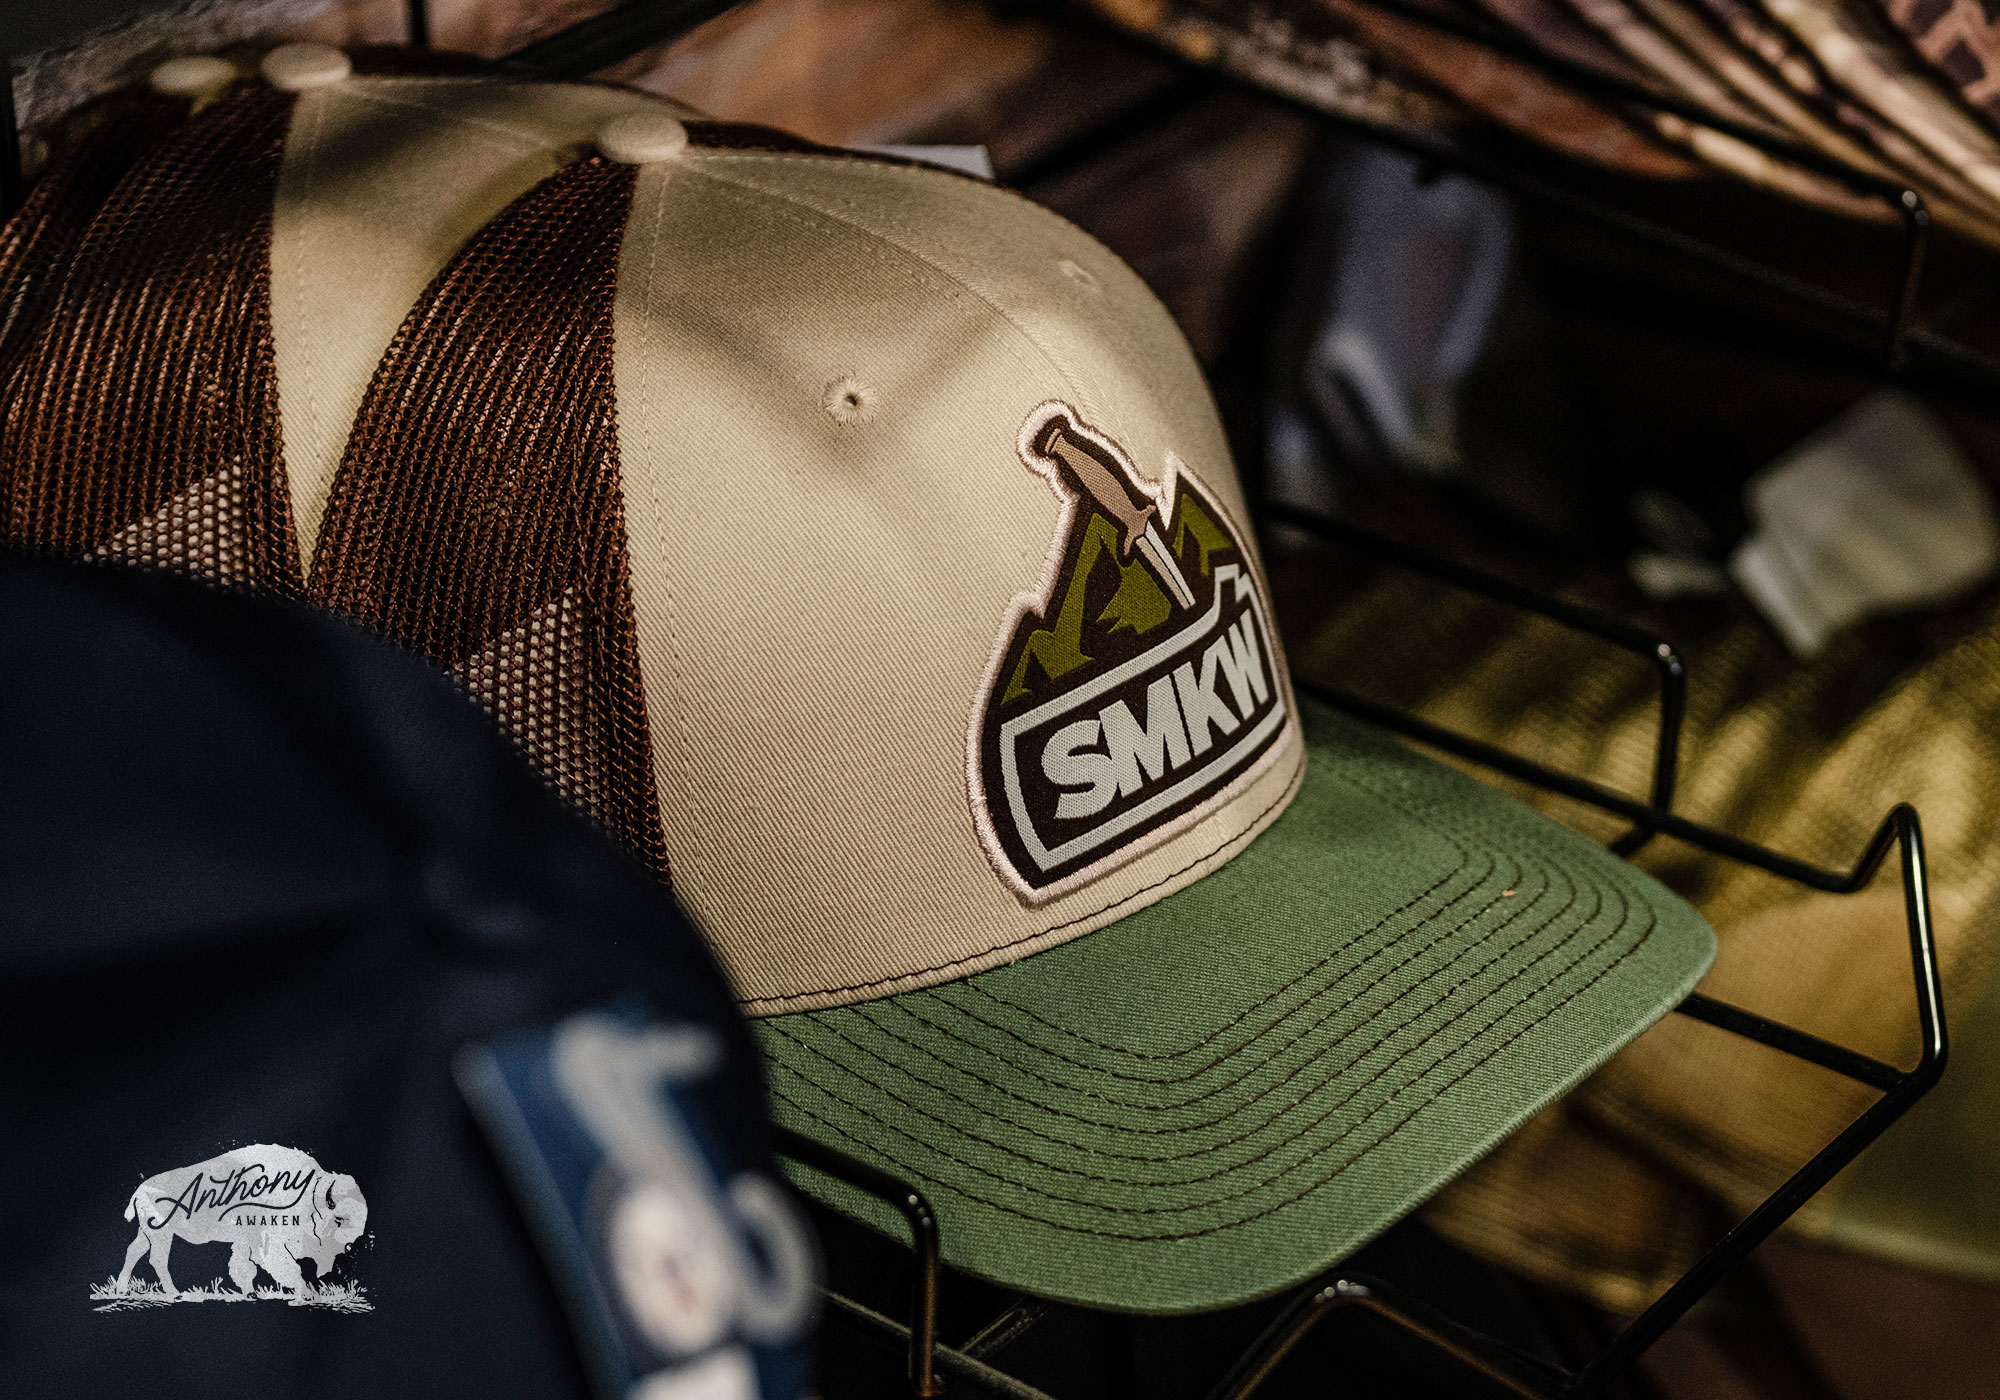 SMKW Hats